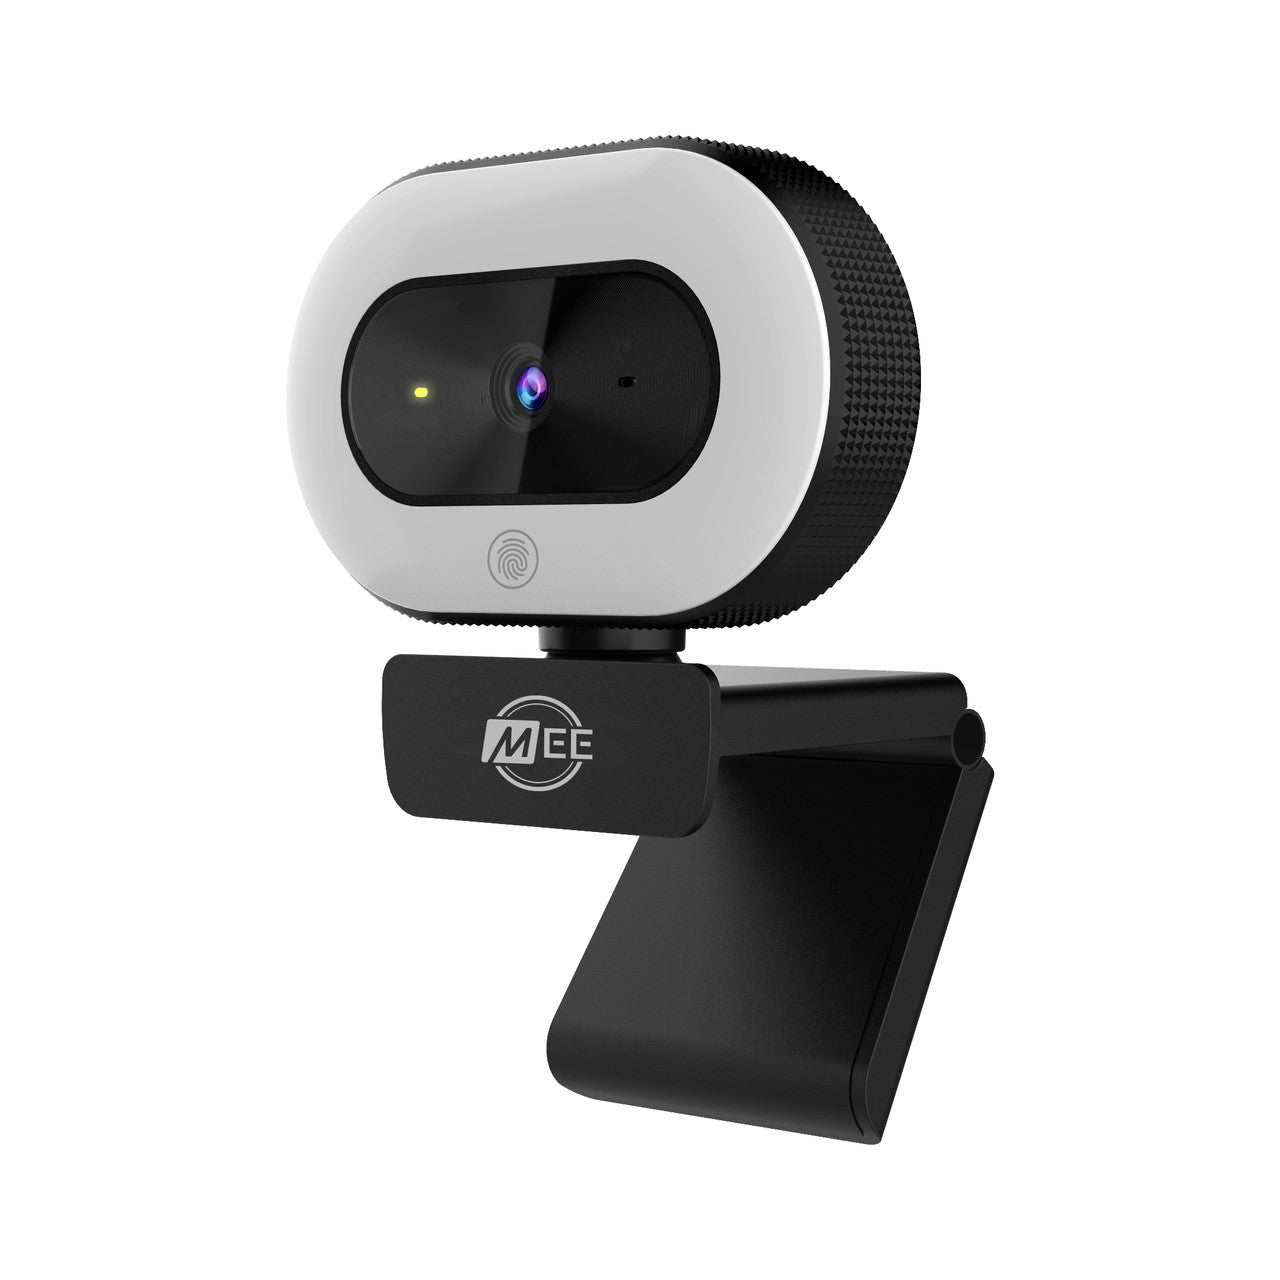 Image of CL8A 1080p Live Webcam with LED Ring Light.